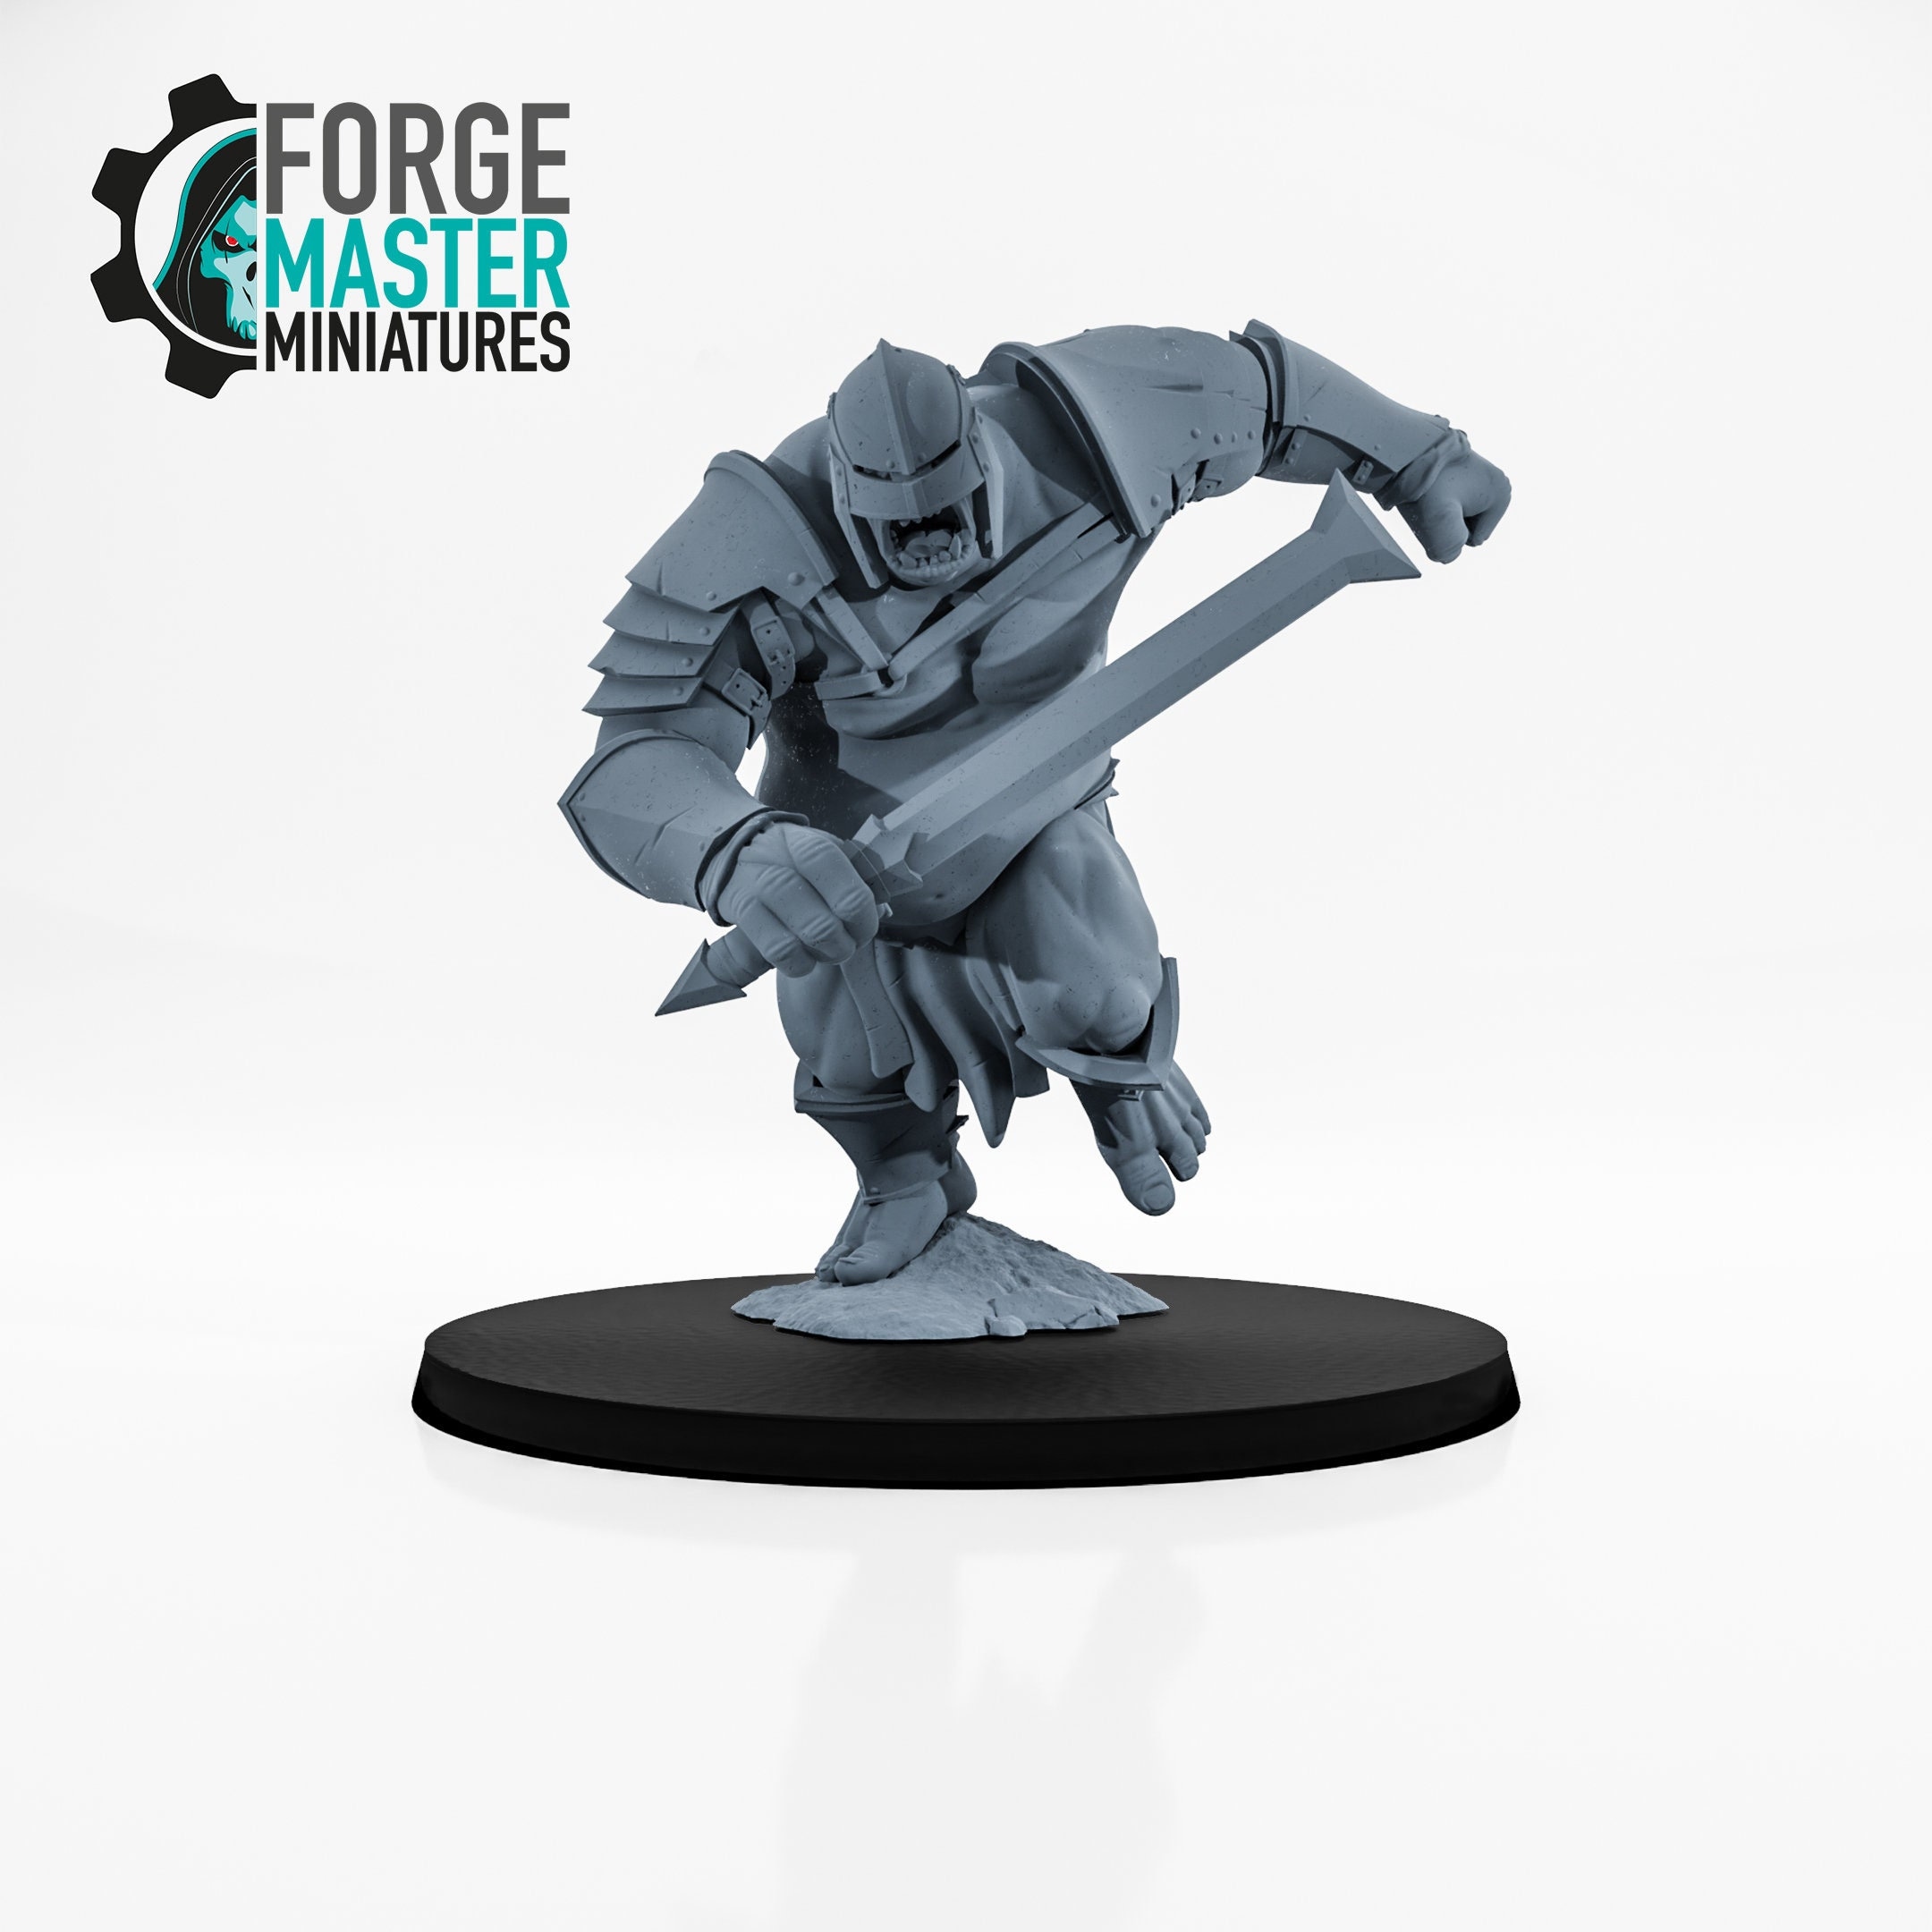 Blood Hand Troll wargaming miniatures designed by Davale Games 3D printed by Forgemaster Miniatures